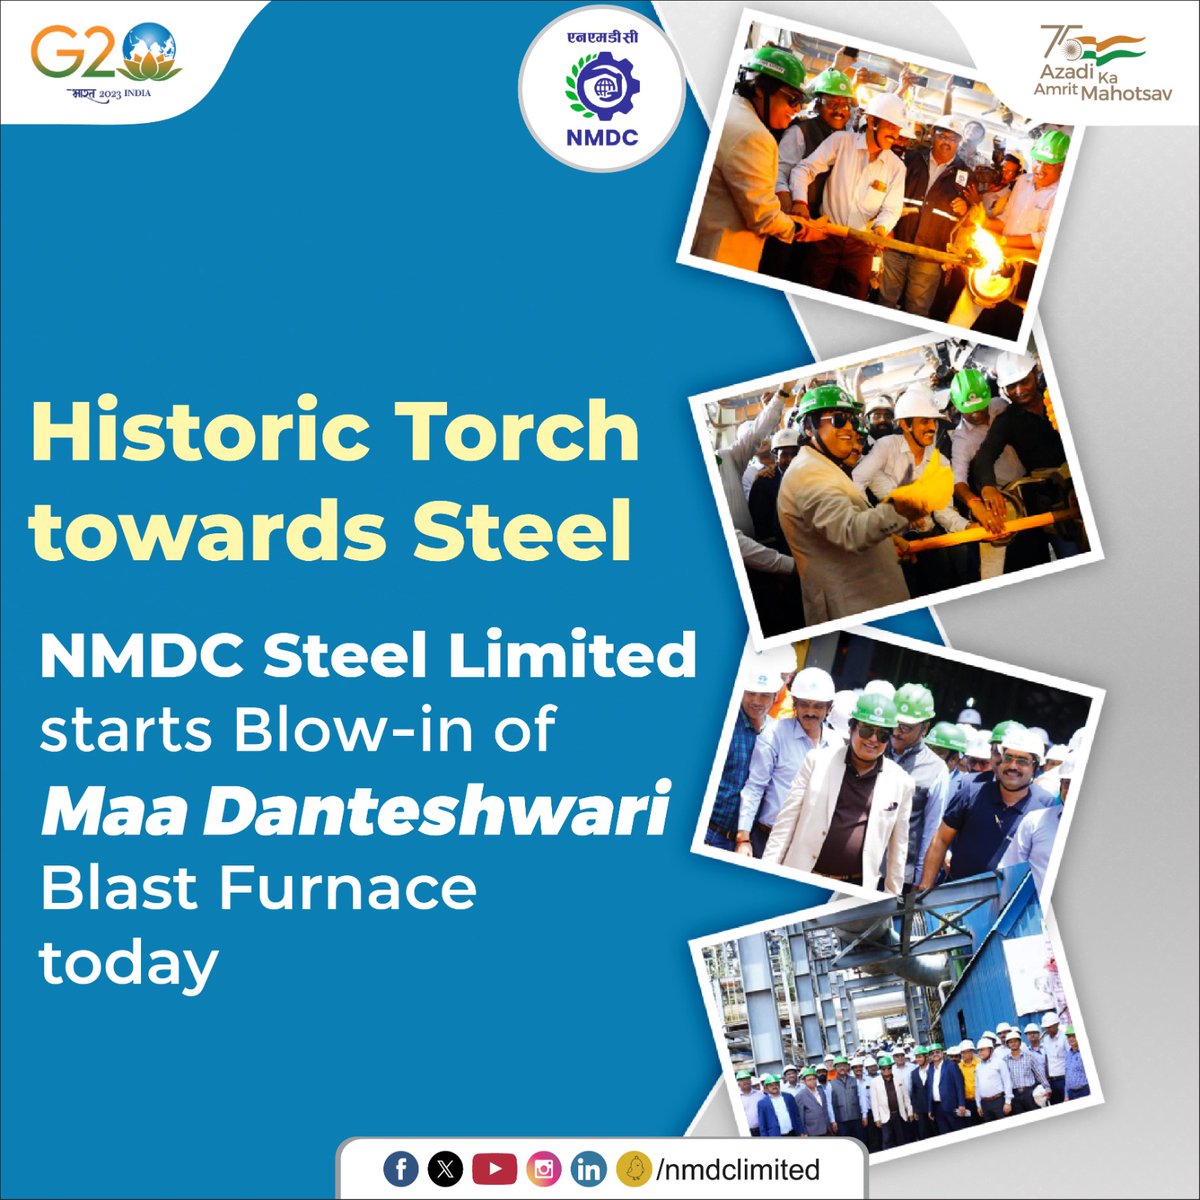 Shri Amitava Mukherjee, CMD (Additional Charge) along with Senior Management of NMDC and NSL, and other stakeholders light up one of the largest blast furnace in the country at NSL, Nagarnar today.

#aatmanirbharsteel #ispatiirada #harekkaamdeshkenaam #steel